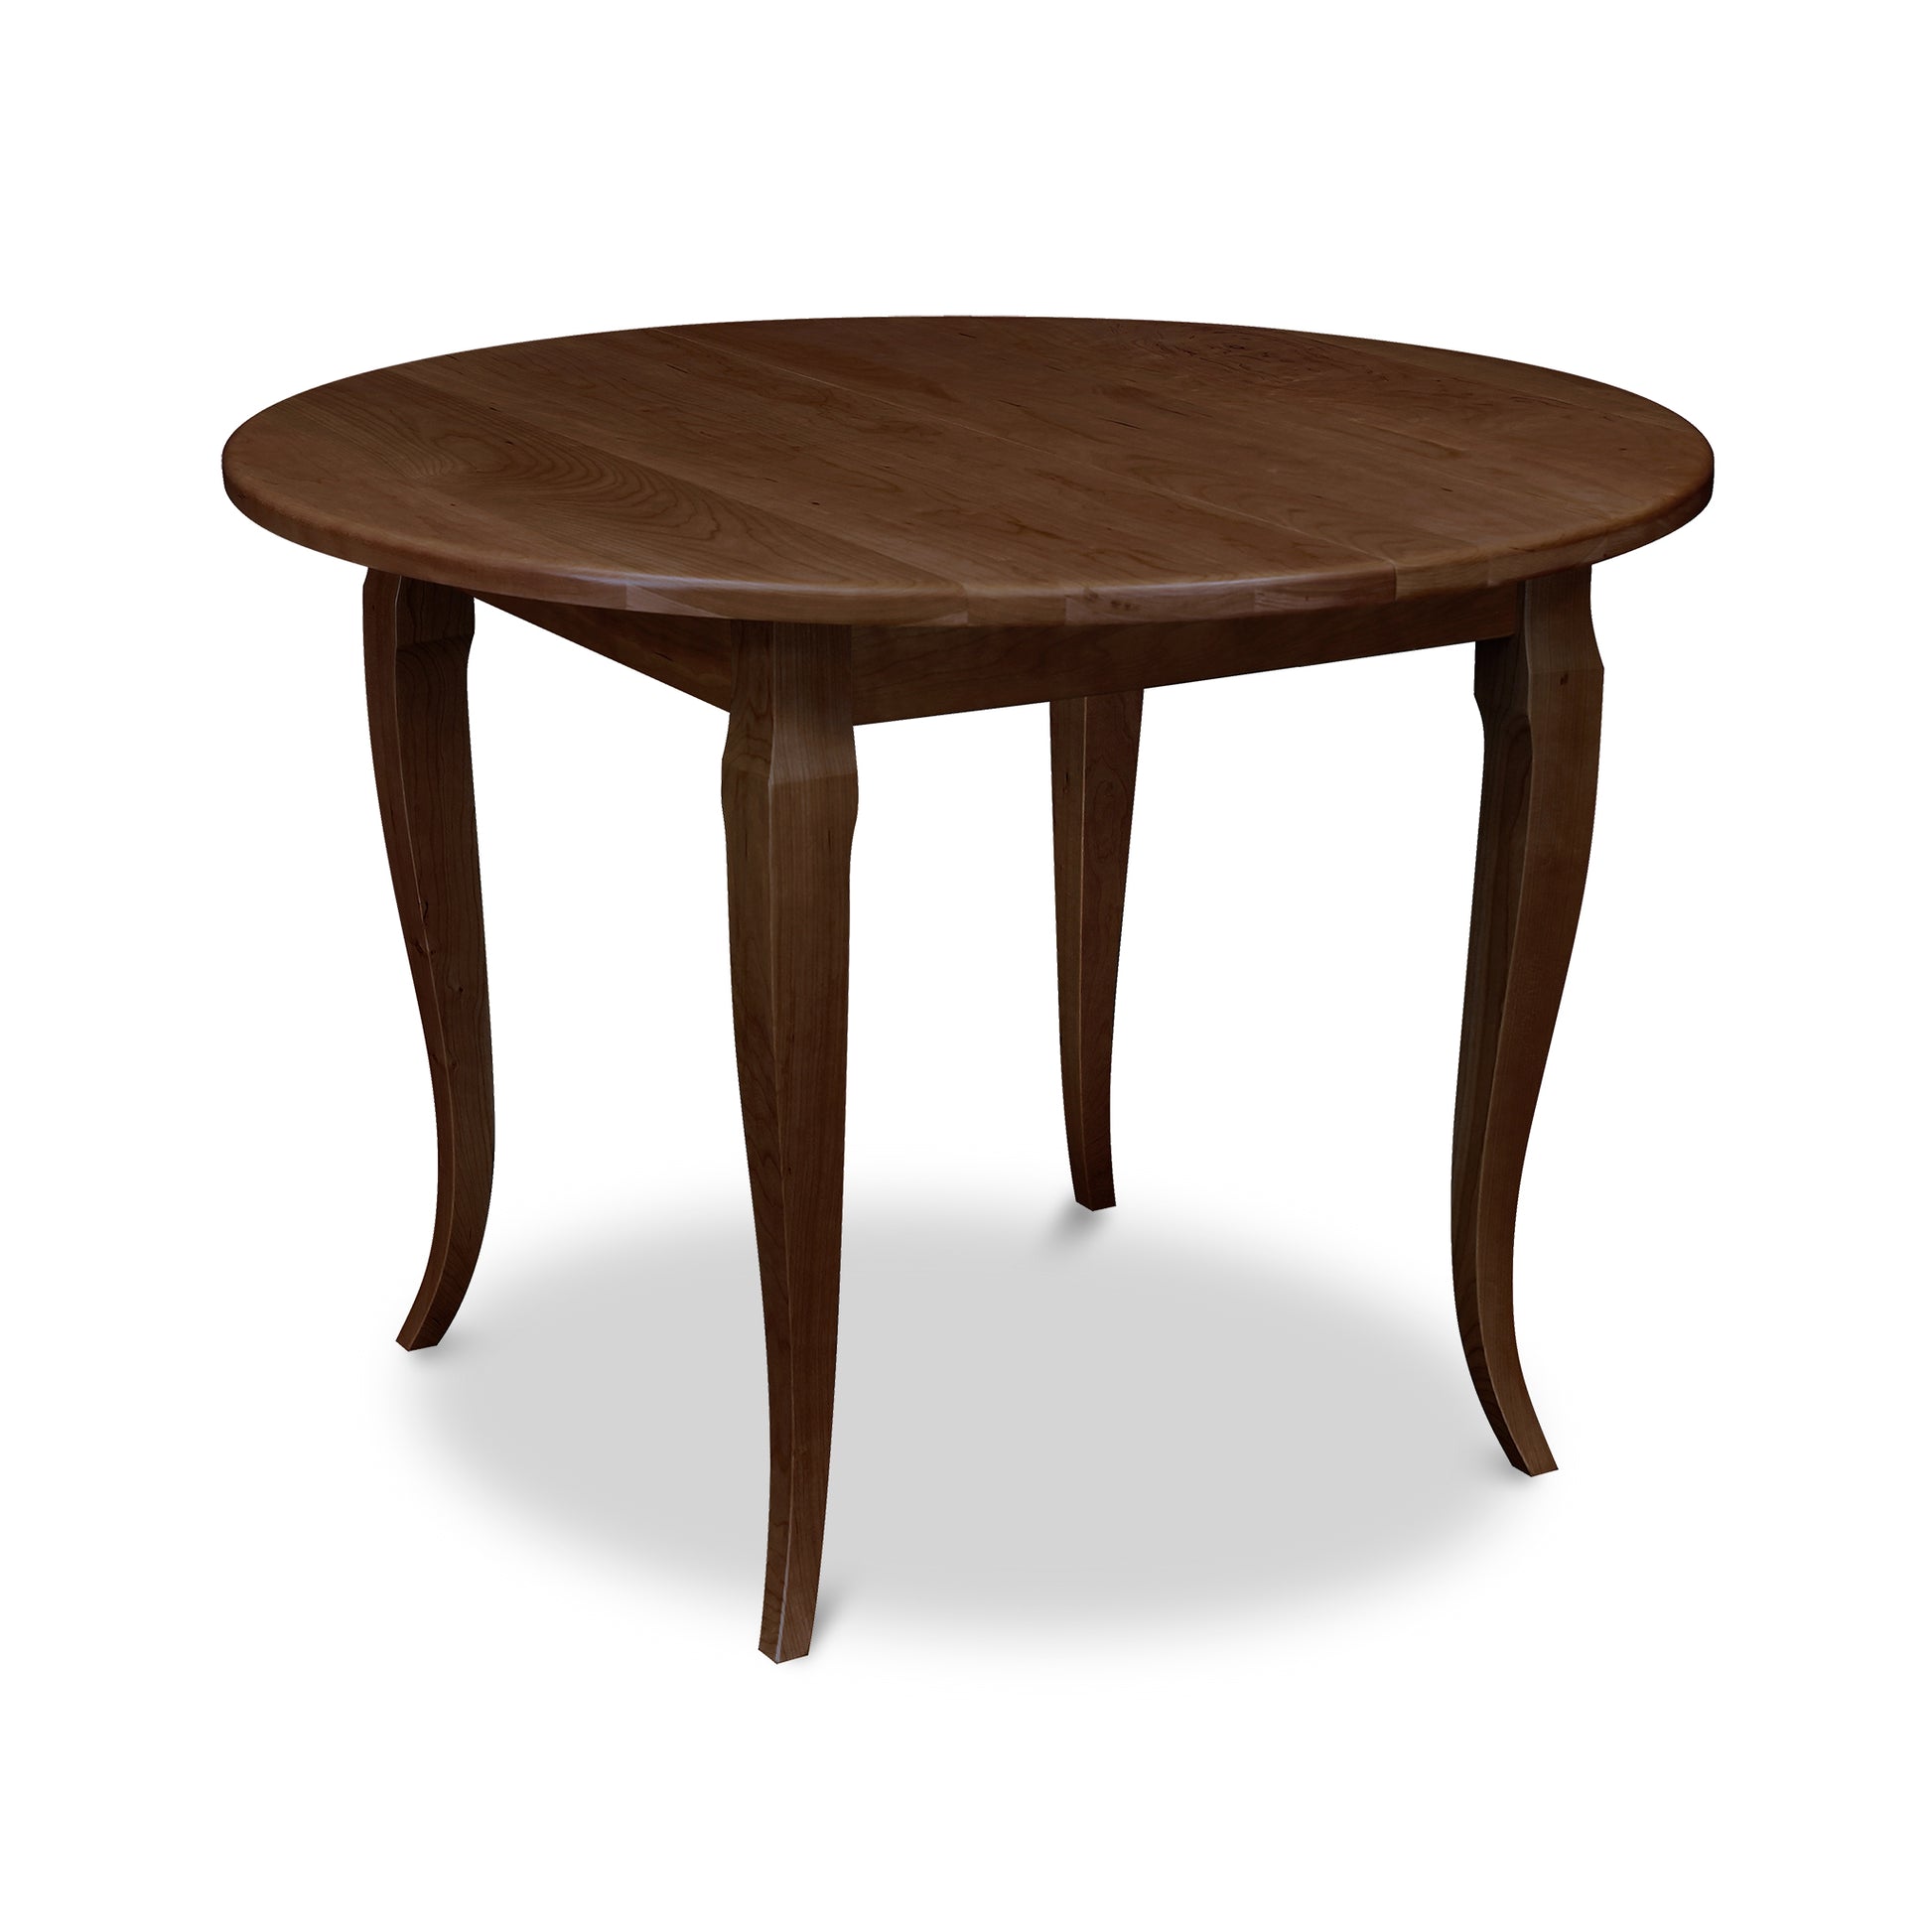 A French Country Round Solid Top Table with a wooden base, perfect for Lyndon Furniture-inspired interiors.